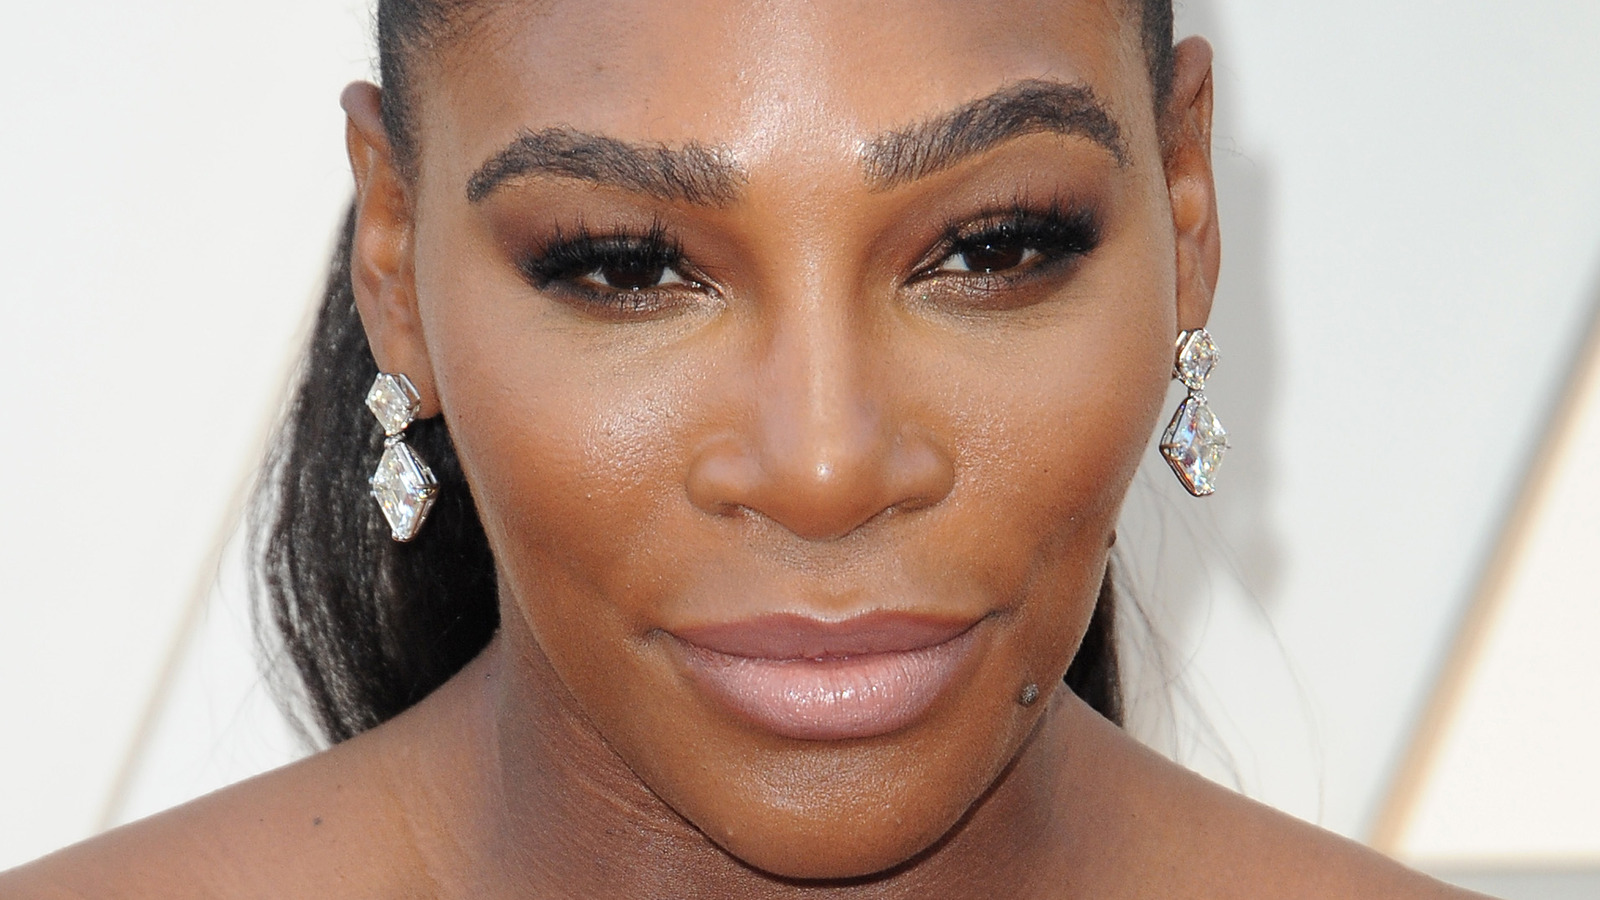 Serena Williams on why her dad didn't walk her down the aisle at